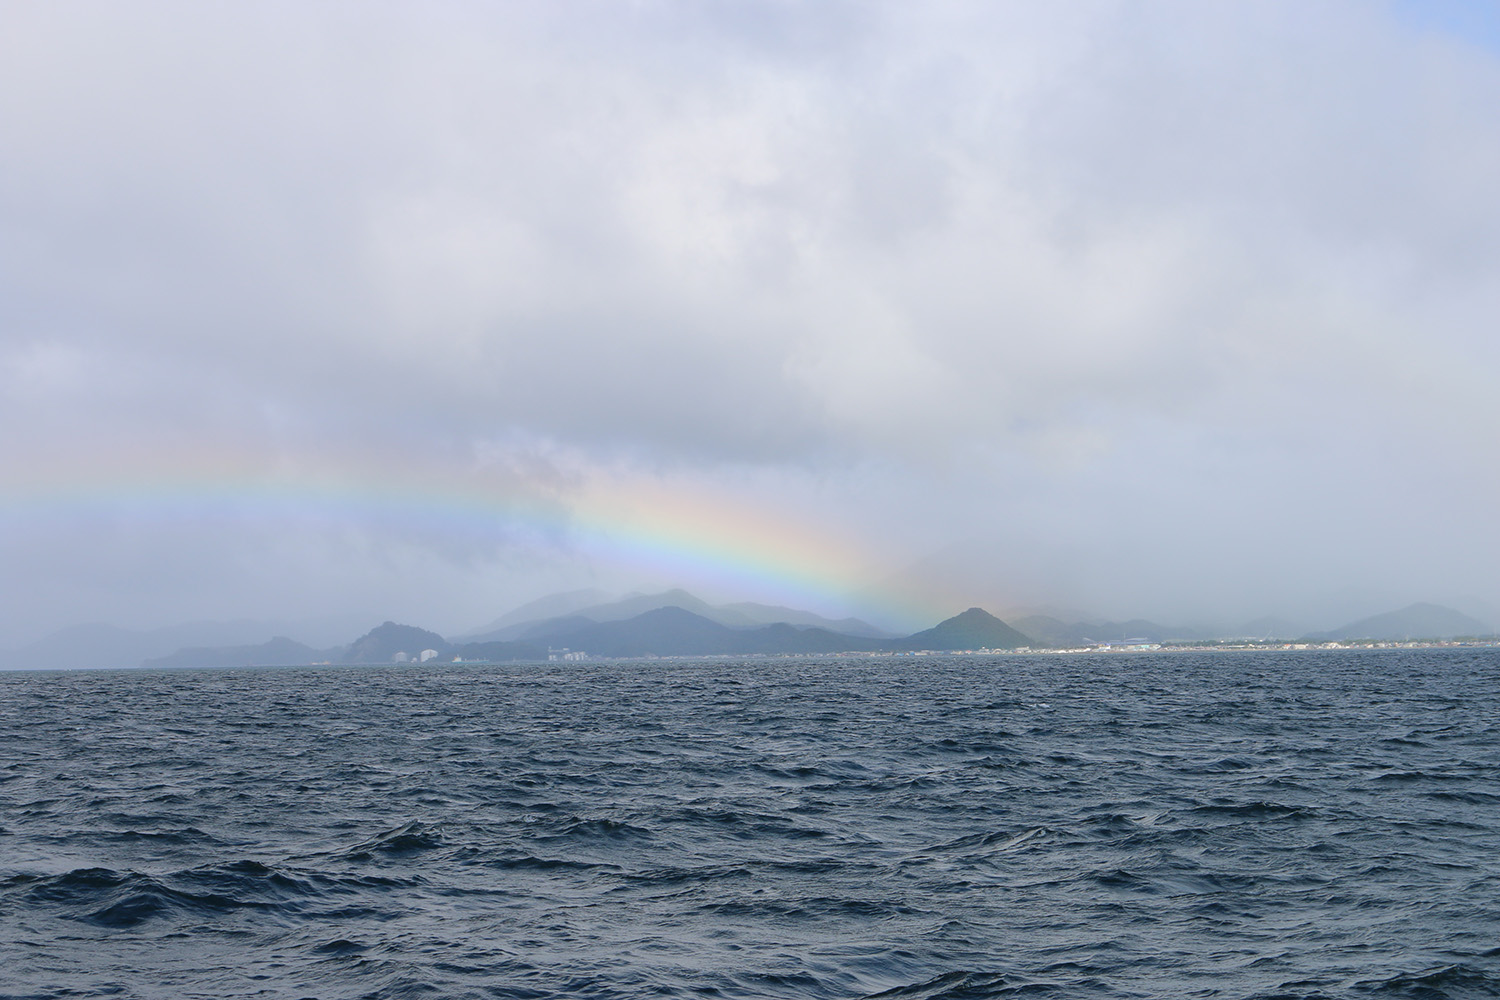 Photo of north Japan's Aomori coastline, from the sea with a rainbow over the land.